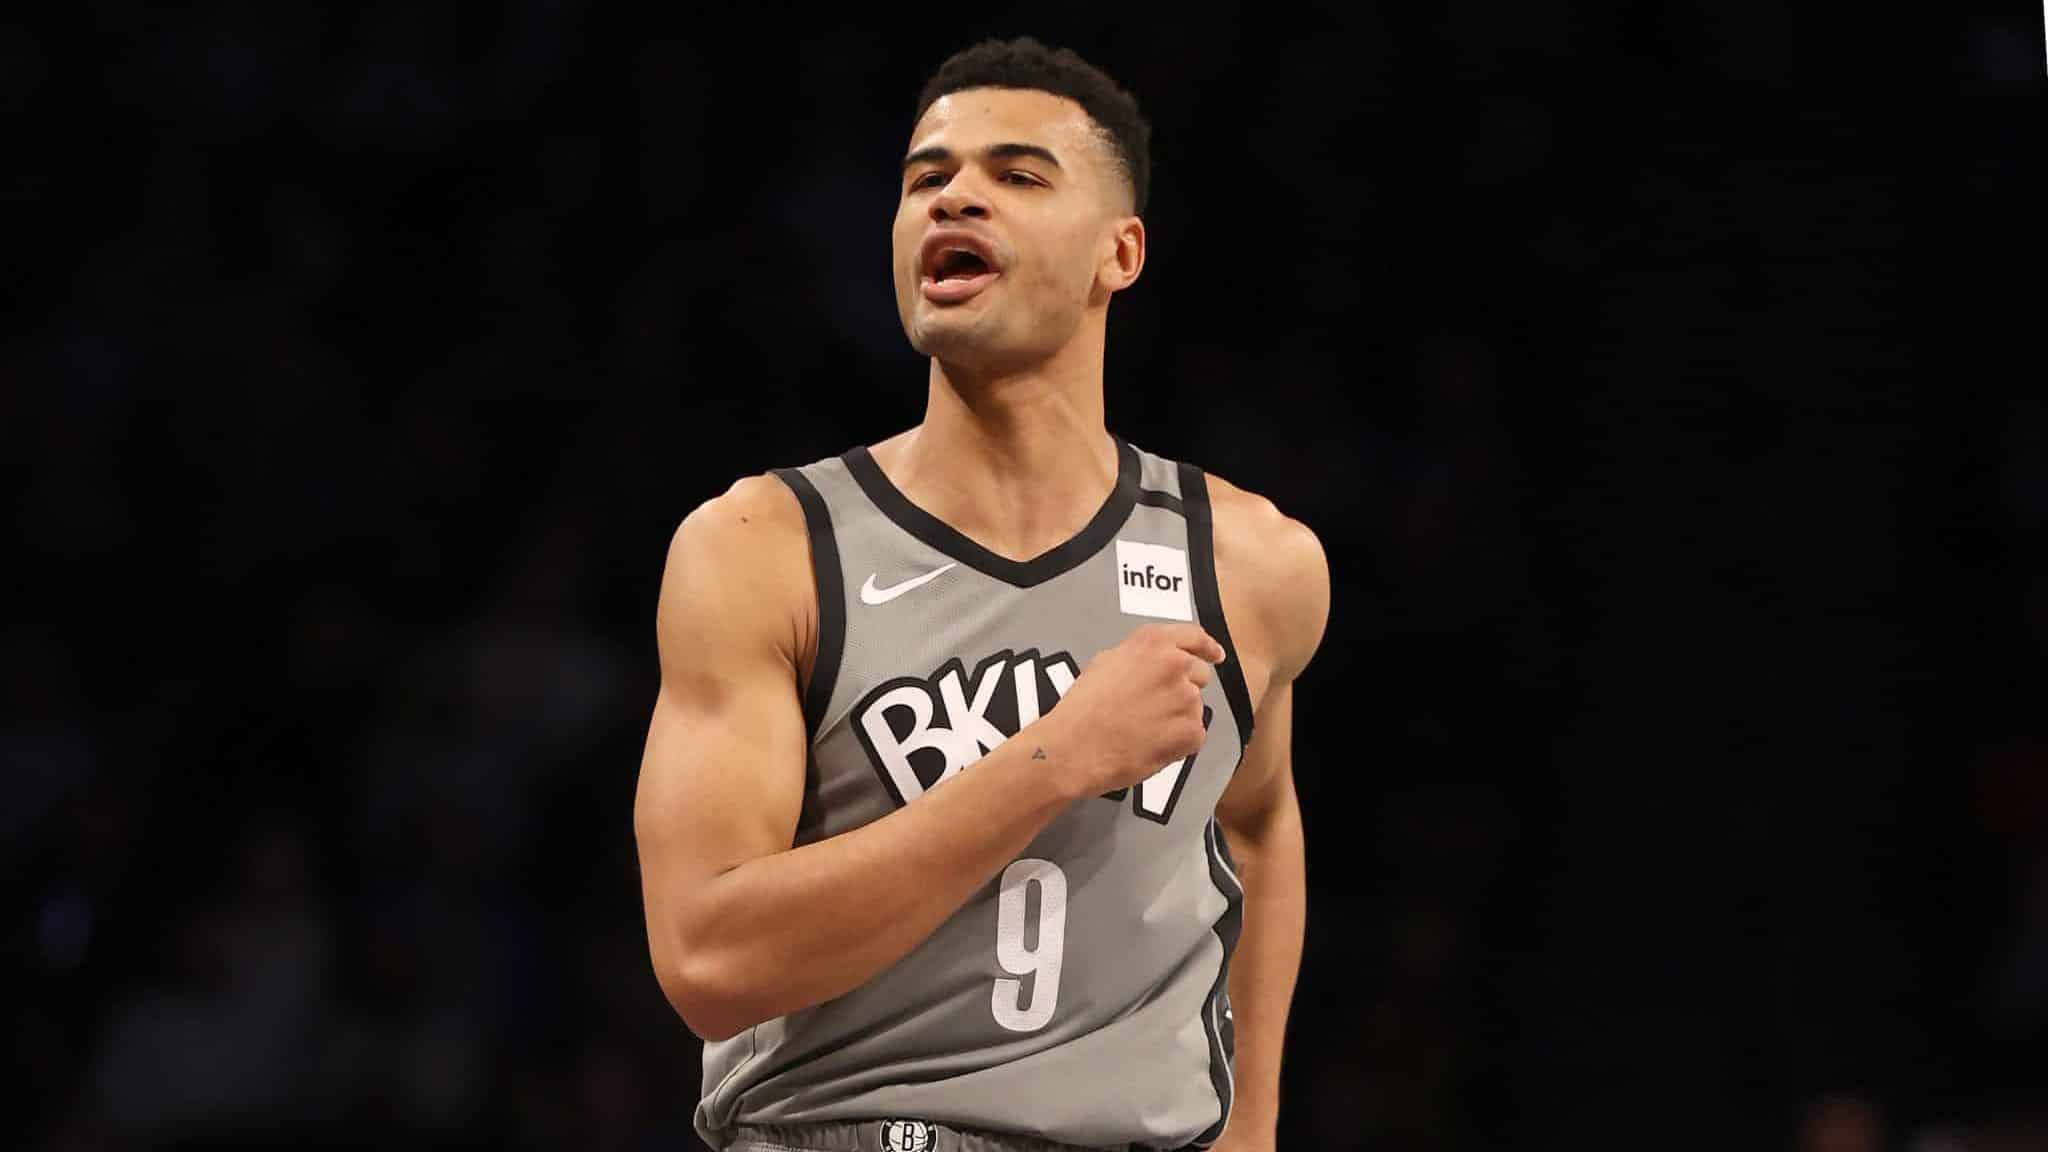 NEW YORK, NEW YORK - JANUARY 20: Timothe Luwawu-Cabarrot #9 of the Brooklyn Nets celebrates his three point shot in the second quarter against the Philadelphia 76erPhiladelphia 76ersat Barclays Center on January 20, 2020 in New York City.NOTE TO USER: User expressly acknowledges and agrees that, by downloading and or using this photograph, User is consenting to the terms and conditions of the Getty Images License Agreement.